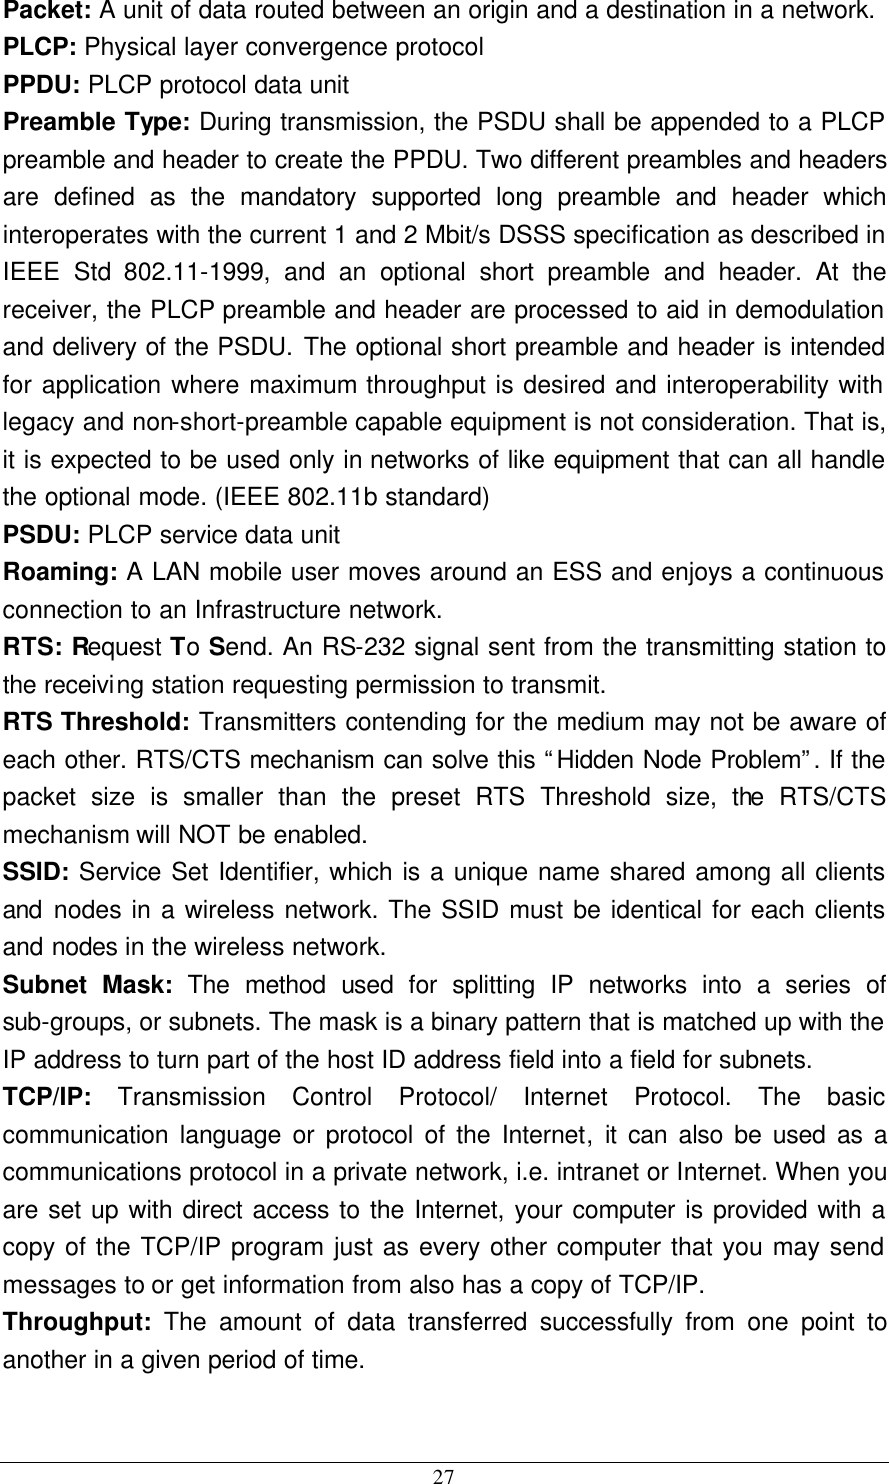  27 Packet: A unit of data routed between an origin and a destination in a network. PLCP: Physical layer convergence protocol PPDU: PLCP protocol data unit Preamble Type: During transmission, the PSDU shall be appended to a PLCP preamble and header to create the PPDU. Two different preambles and headers are defined as the mandatory supported long preamble and header which interoperates with the current 1 and 2 Mbit/s DSSS specification as described in IEEE Std 802.11-1999, and an optional short preamble and header. At the receiver, the PLCP preamble and header are processed to aid in demodulation and delivery of the PSDU. The optional short preamble and header is intended for application where maximum throughput is desired and interoperability with legacy and non-short-preamble capable equipment is not consideration. That is, it is expected to be used only in networks of like equipment that can all handle the optional mode. (IEEE 802.11b standard) PSDU: PLCP service data unit Roaming: A LAN mobile user moves around an ESS and enjoys a continuous connection to an Infrastructure network. RTS: Request To Send. An RS-232 signal sent from the transmitting station to the receiving station requesting permission to transmit. RTS Threshold: Transmitters contending for the medium may not be aware of each other. RTS/CTS mechanism can solve this “Hidden Node Problem”. If the packet size is smaller than the preset RTS Threshold size, the RTS/CTS mechanism will NOT be enabled. SSID: Service Set Identifier, which is a unique name shared among all clients and nodes in a wireless network. The SSID must be identical for each clients and nodes in the wireless network. Subnet Mask: The method used for splitting IP networks into a series of sub-groups, or subnets. The mask is a binary pattern that is matched up with the IP address to turn part of the host ID address field into a field for subnets. TCP/IP:  Transmission Control Protocol/ Internet Protocol. The basic communication language or protocol of the Internet, it can also be used as a communications protocol in a private network, i.e. intranet or Internet. When you are set up with direct access to the Internet, your computer is provided with a copy of the TCP/IP program just as every other computer that you may send messages to or get information from also has a copy of TCP/IP. Throughput:  The amount of data transferred successfully from one point to another in a given period of time.  